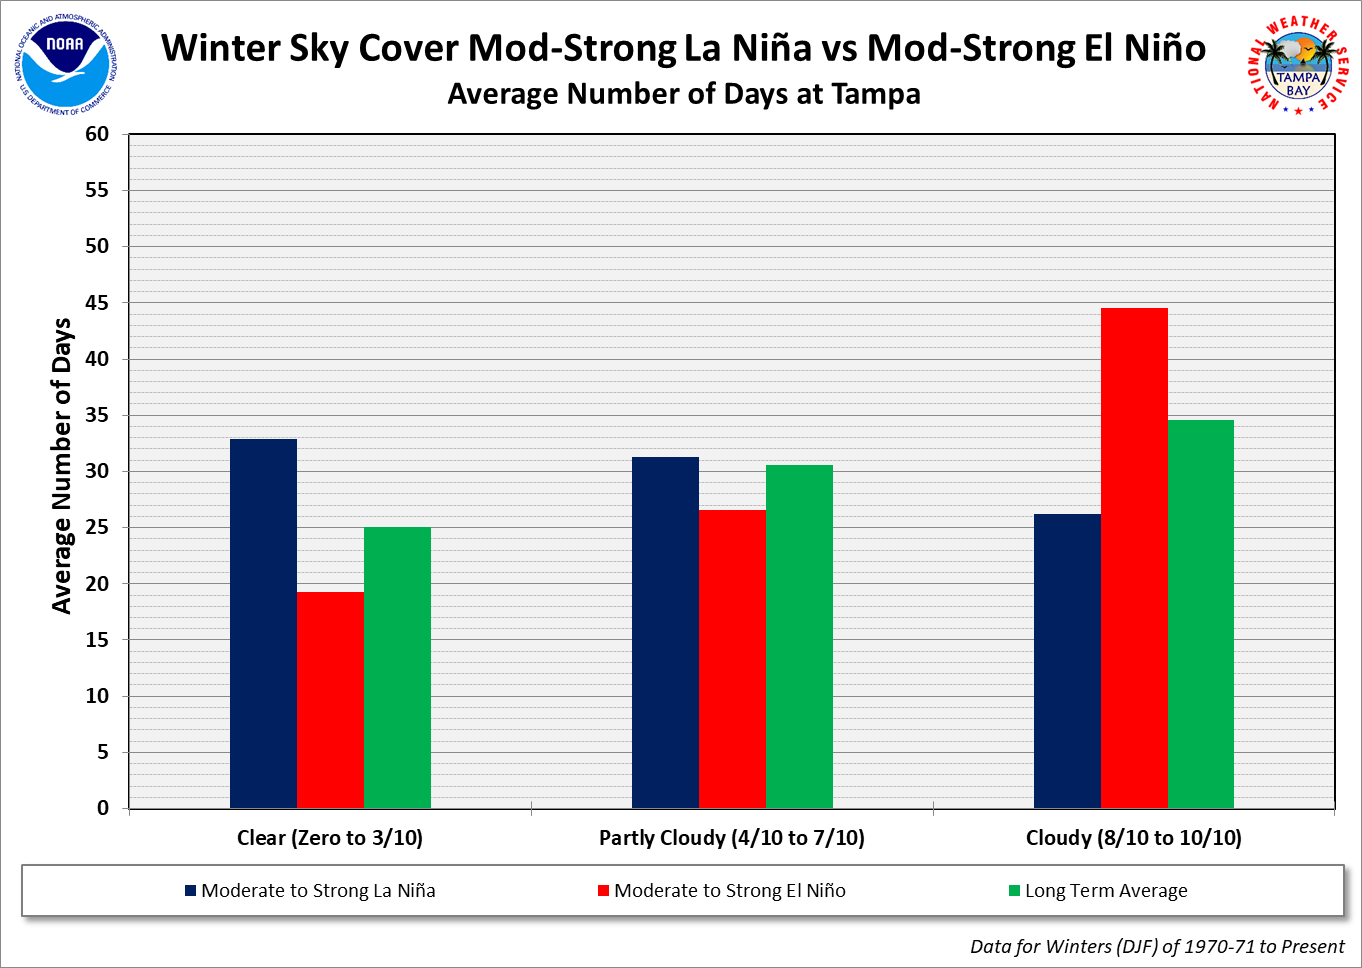 Tampa Sky Cover Average Number of Days for Moderate to Strong El Niño vs La Niña